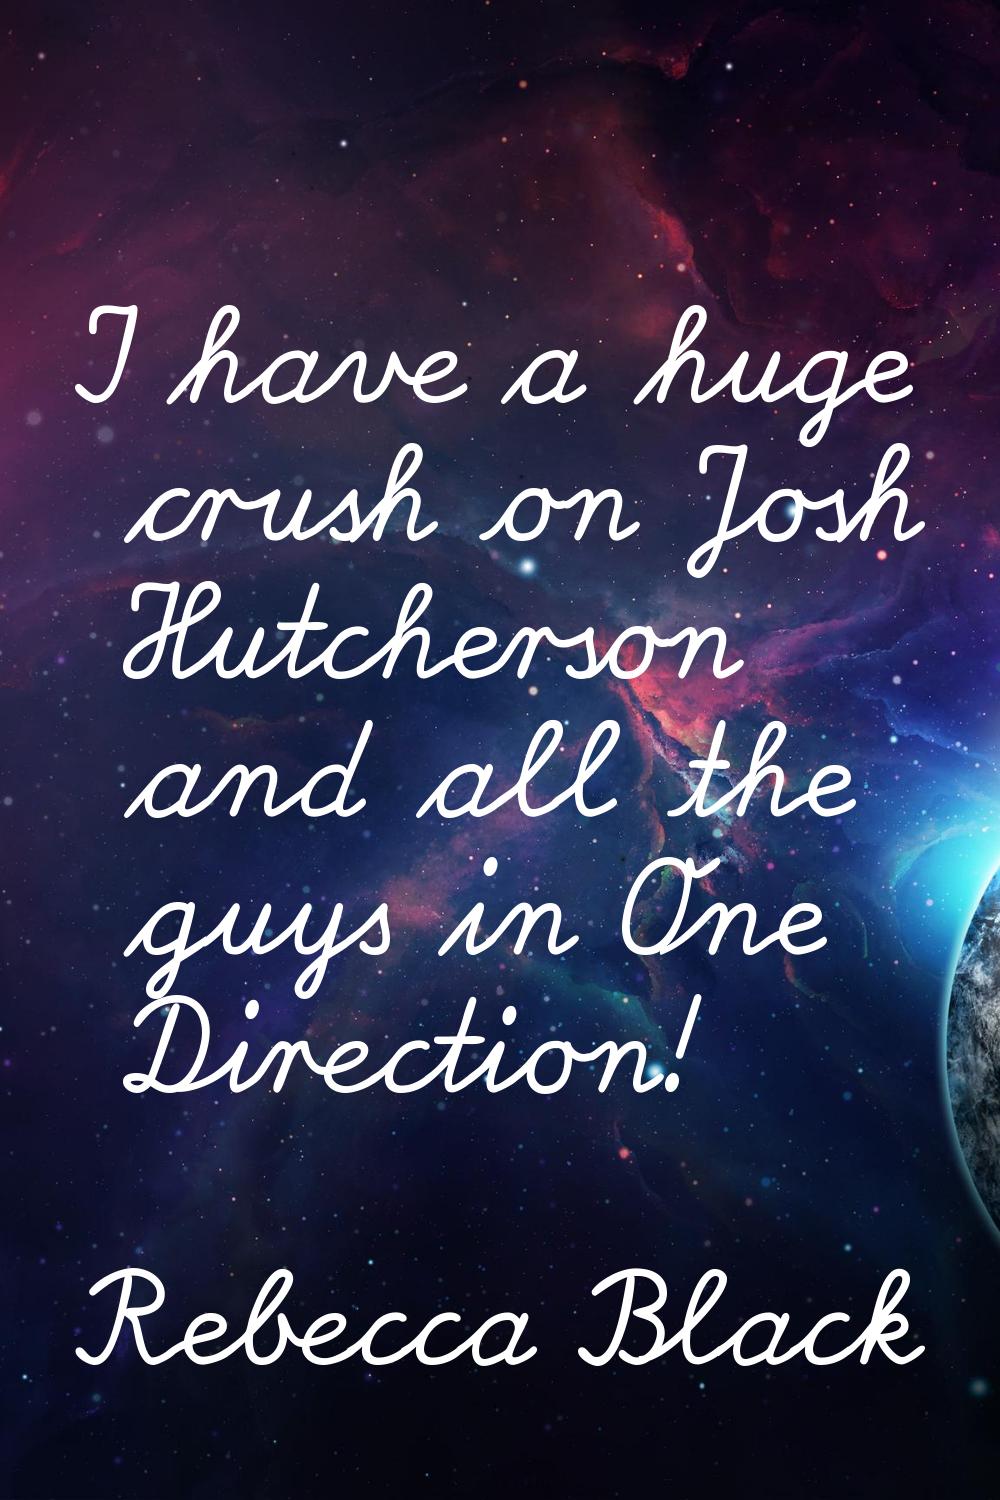 I have a huge crush on Josh Hutcherson and all the guys in One Direction!